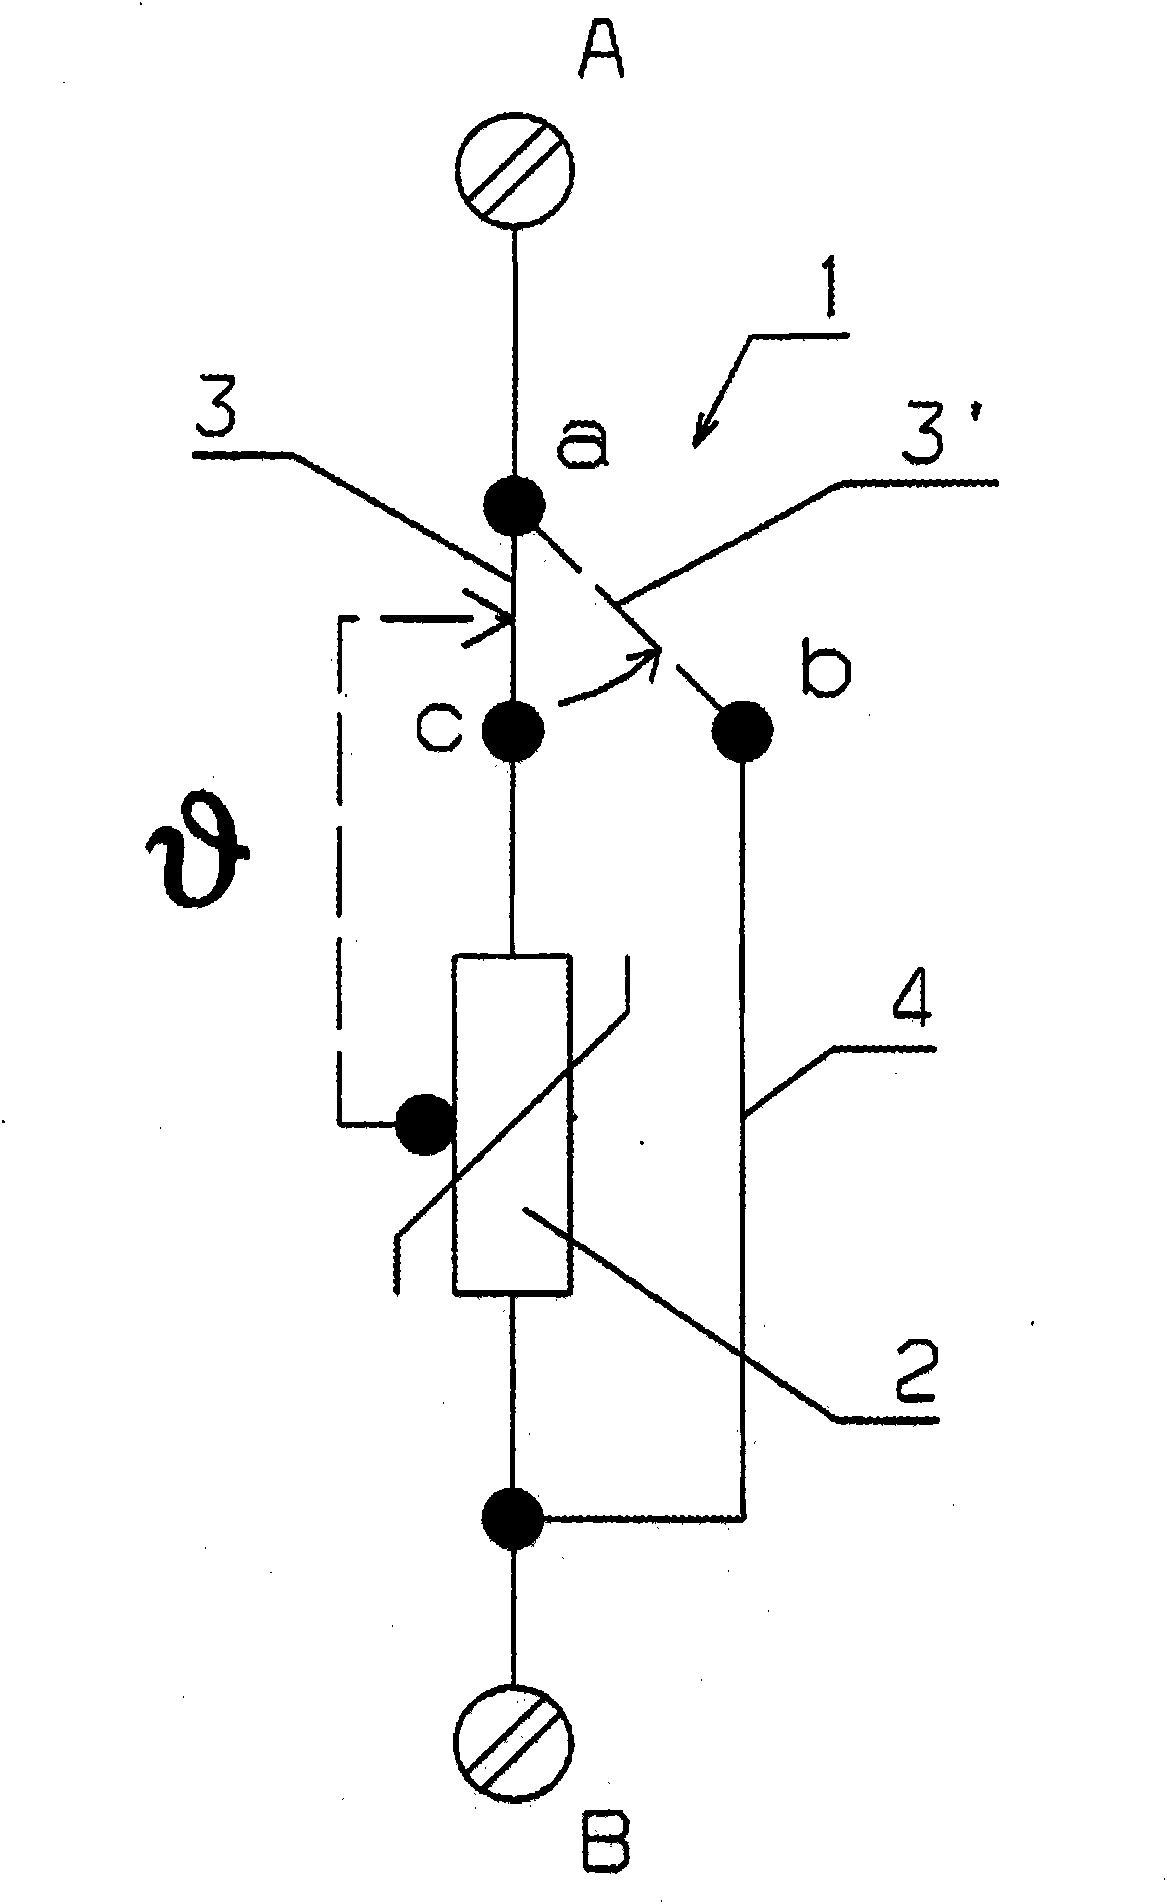 Surge arrester having a housing and having at least one arresting element